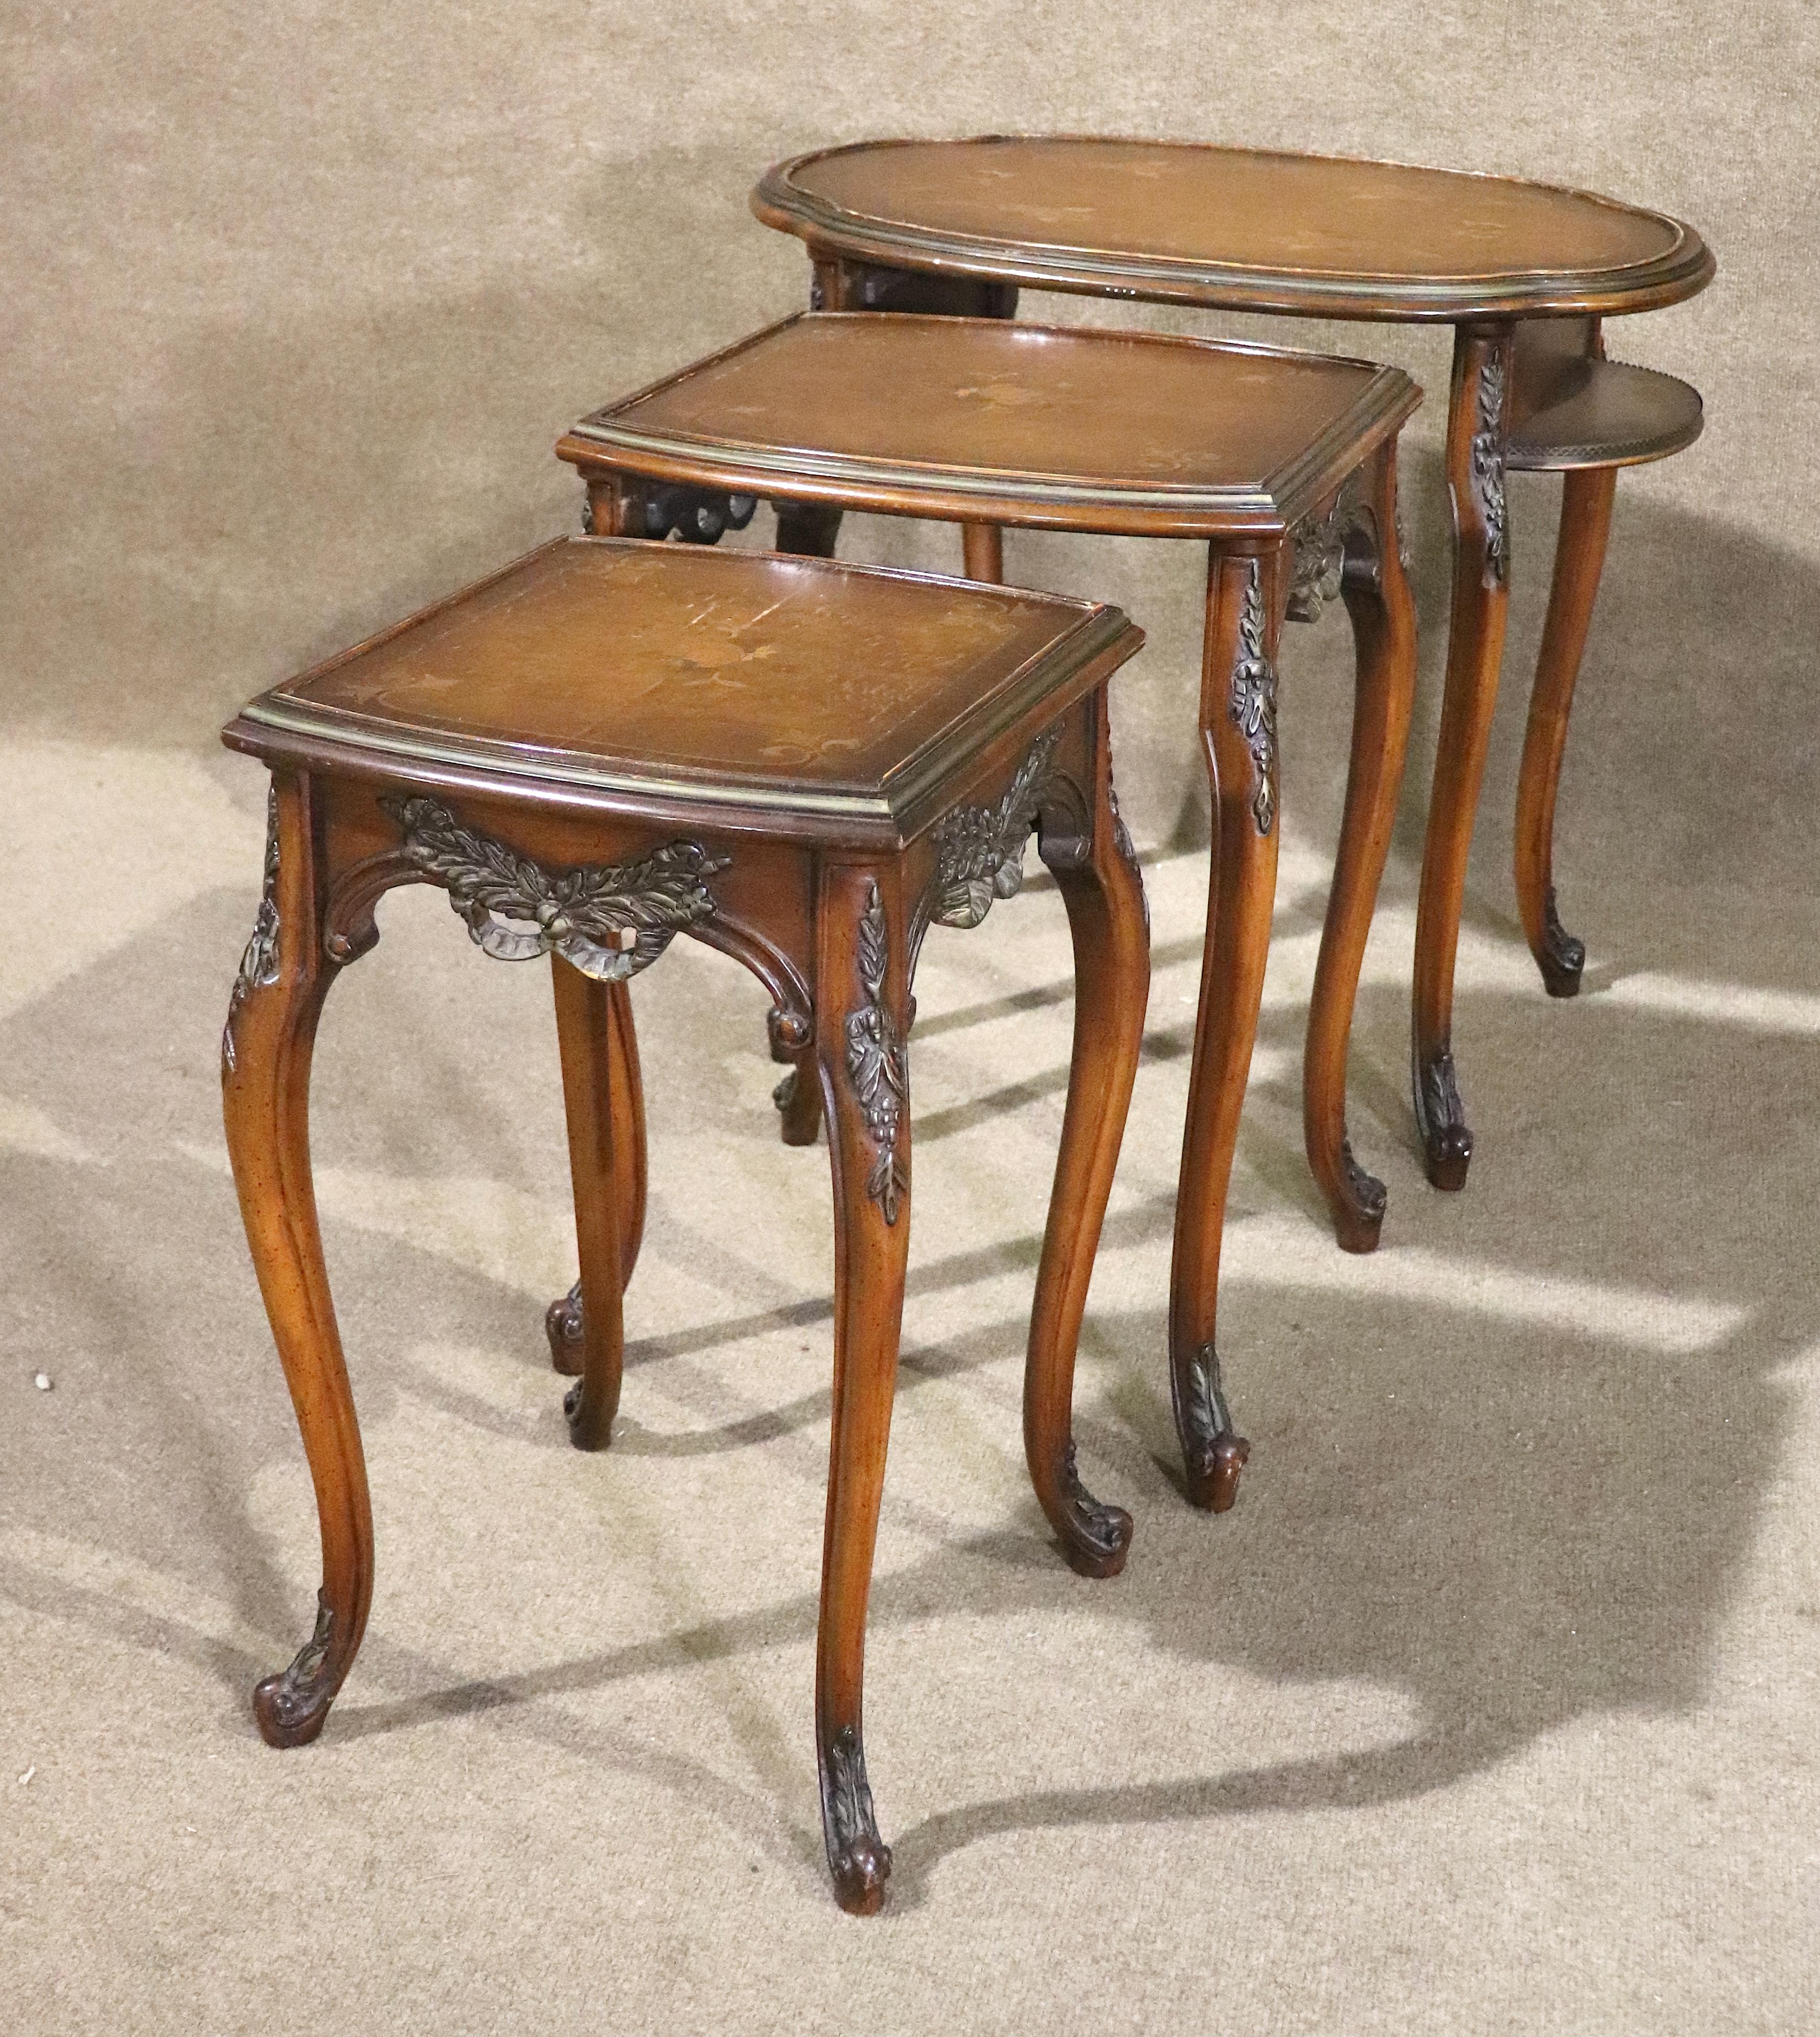 This set of French style stacking tables feature marquetry tops and carved embellishments. Three tables that nest inside each other are perfect for hosting.
Please confirm location NY or NJ